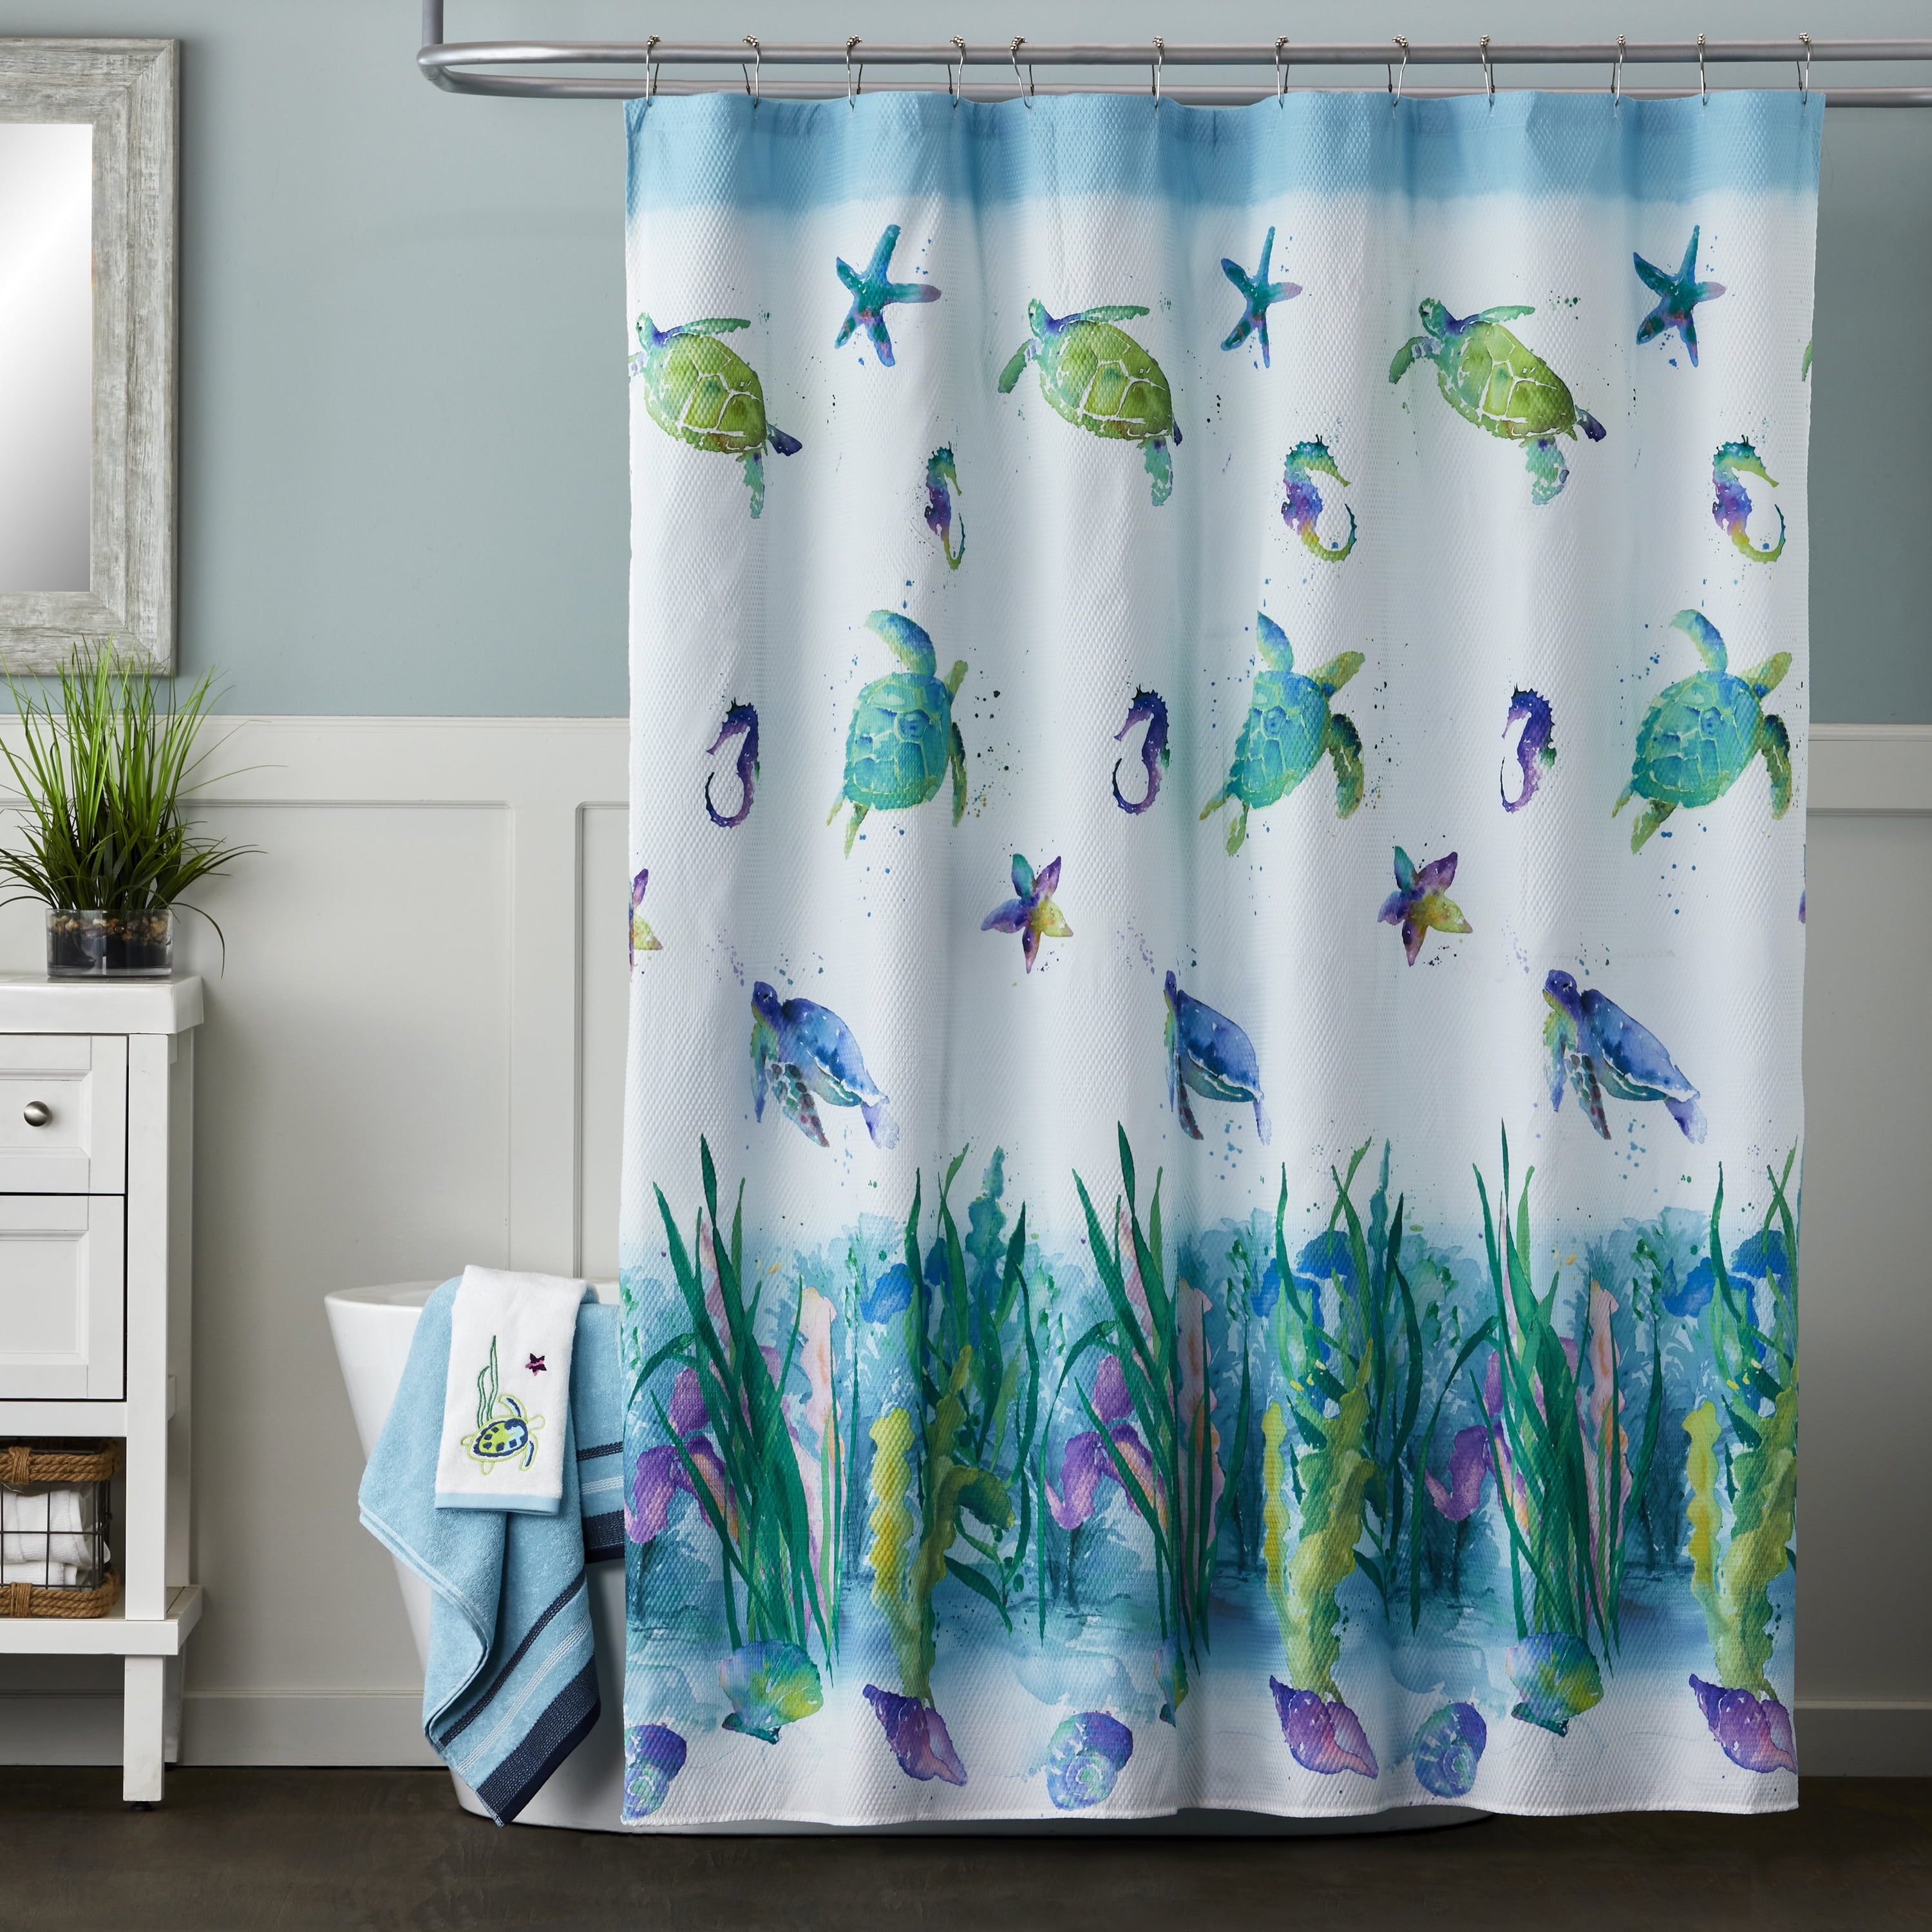 Fishing Rods Float Waterproof Fabric Shower Curtain Liner Bathroom Accessories 